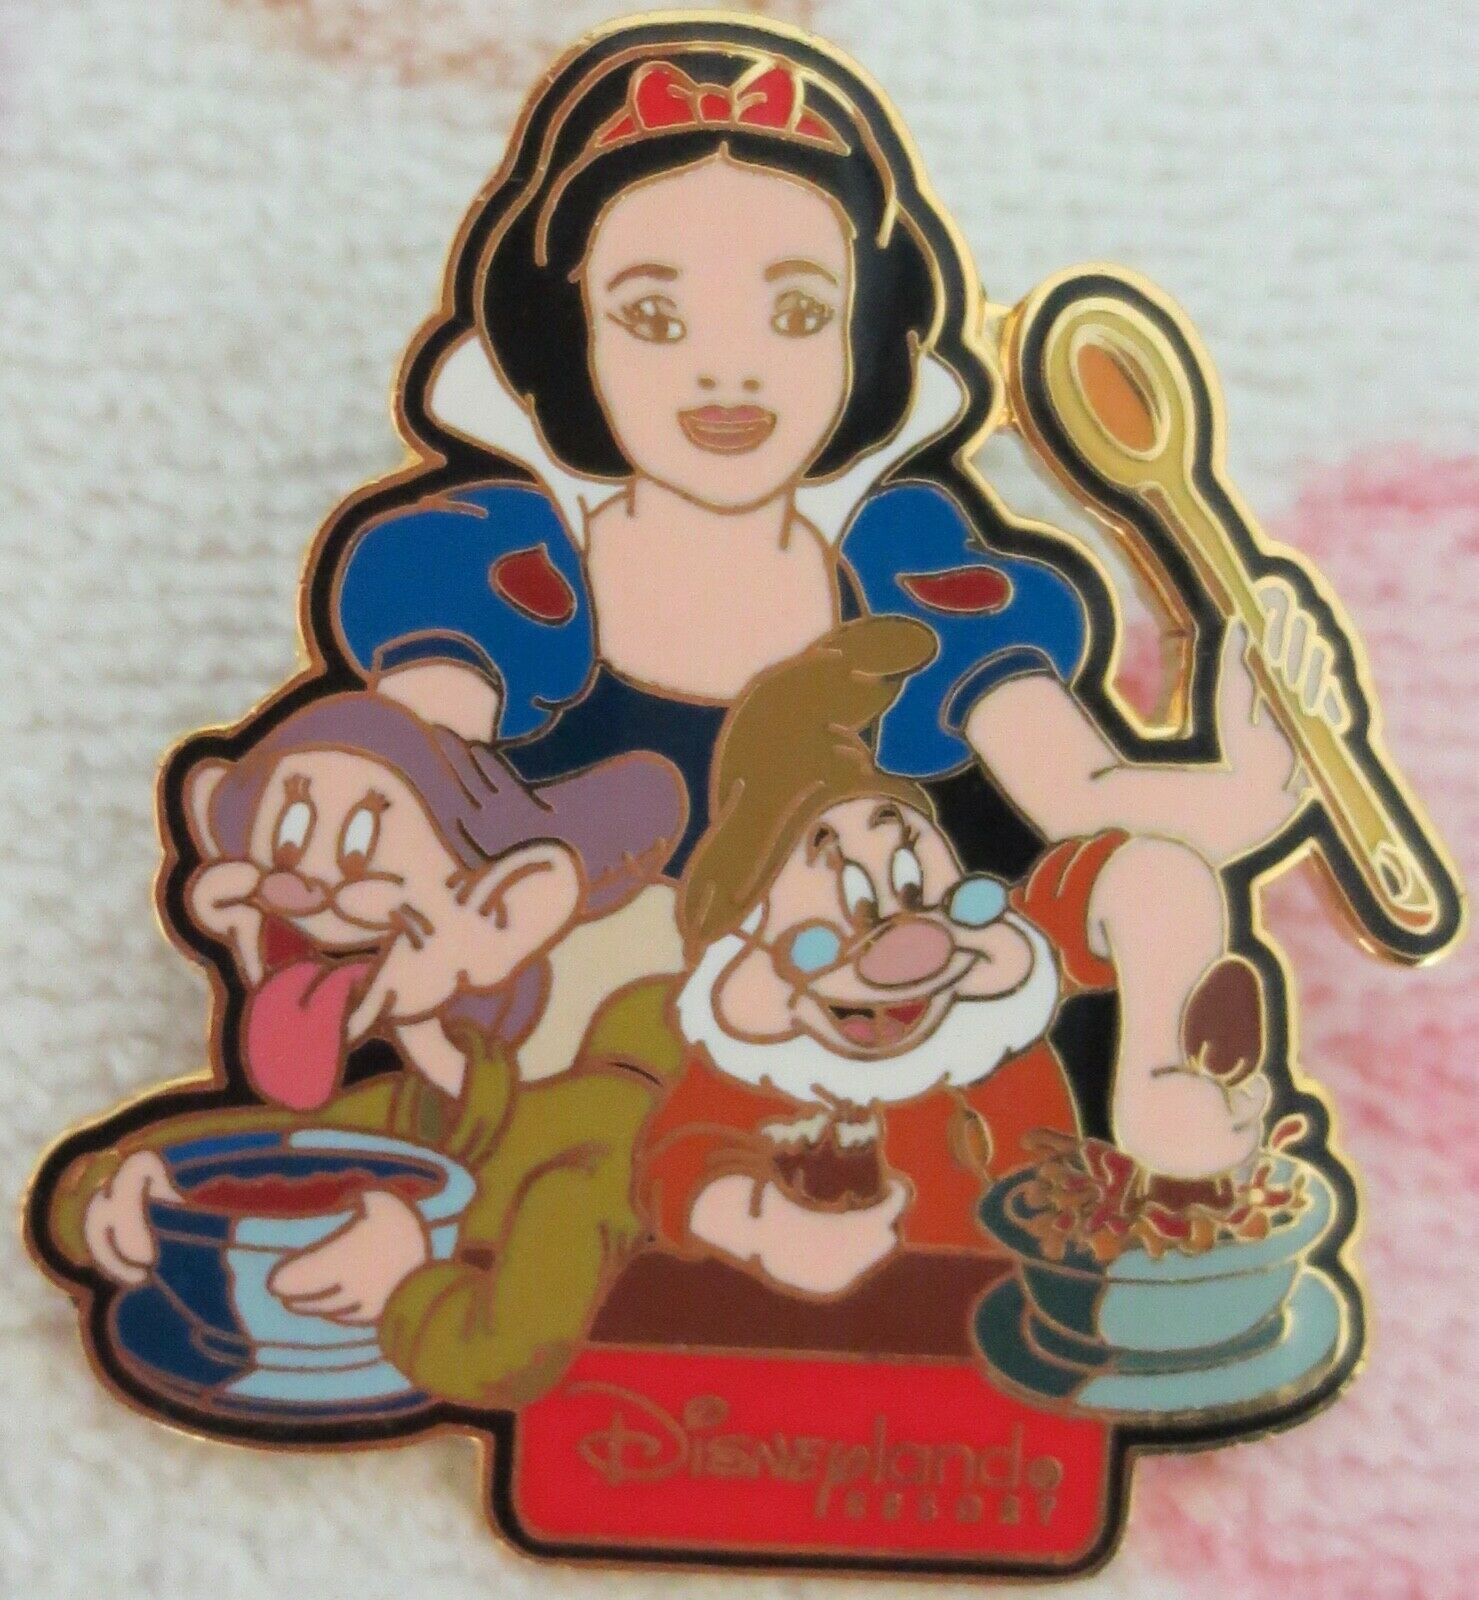 Dlr Snow White Doc Dopey Dining Series Annual Passholder #2 Limited Ed Pin 2002